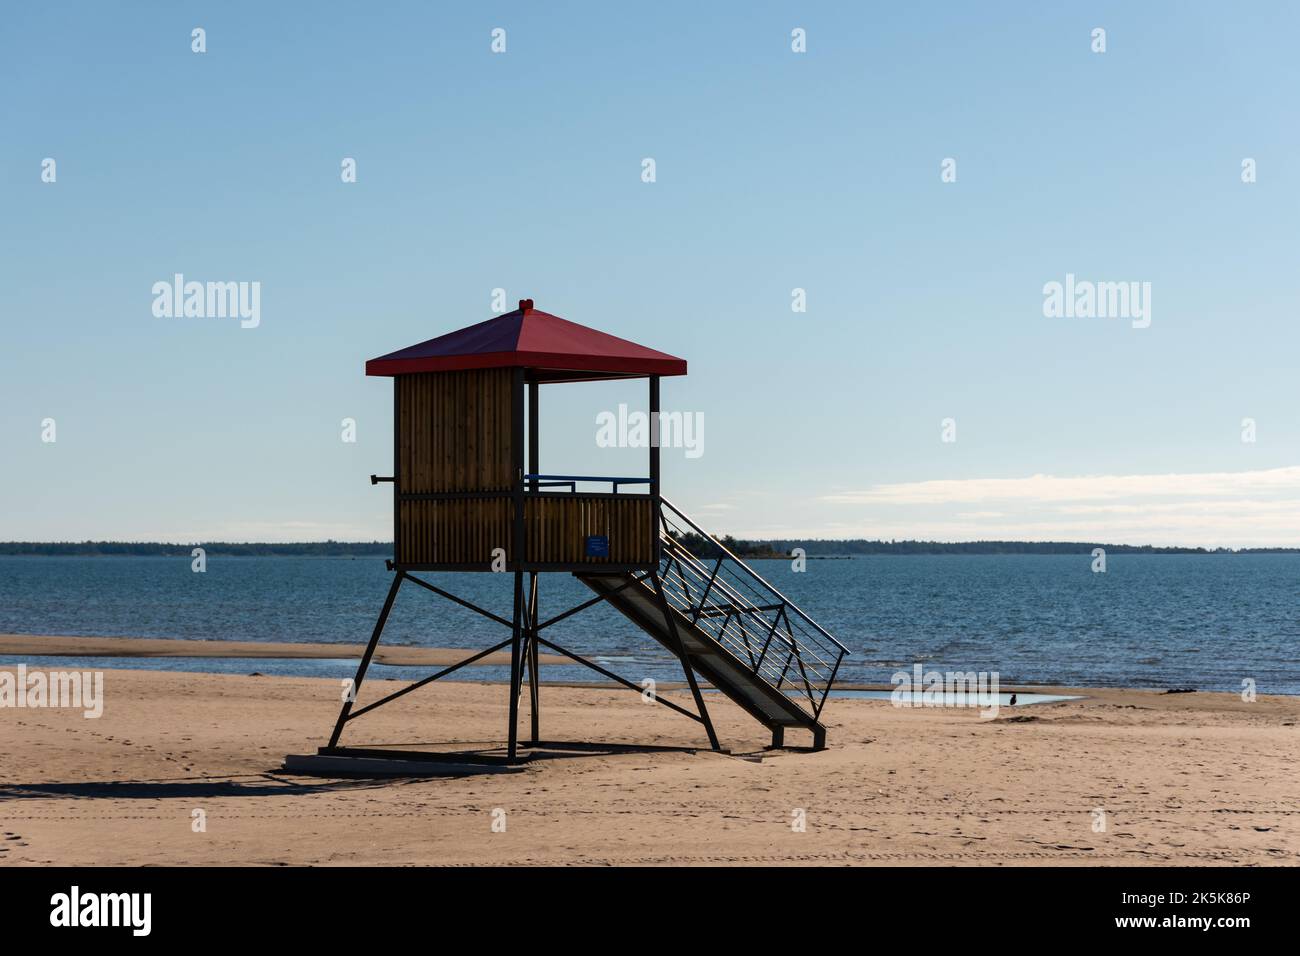 Wooden lifeguard tower with a red roof on the sandy beach of Yyteri in Pori, Finland with clear blue sky in the background Stock Photo